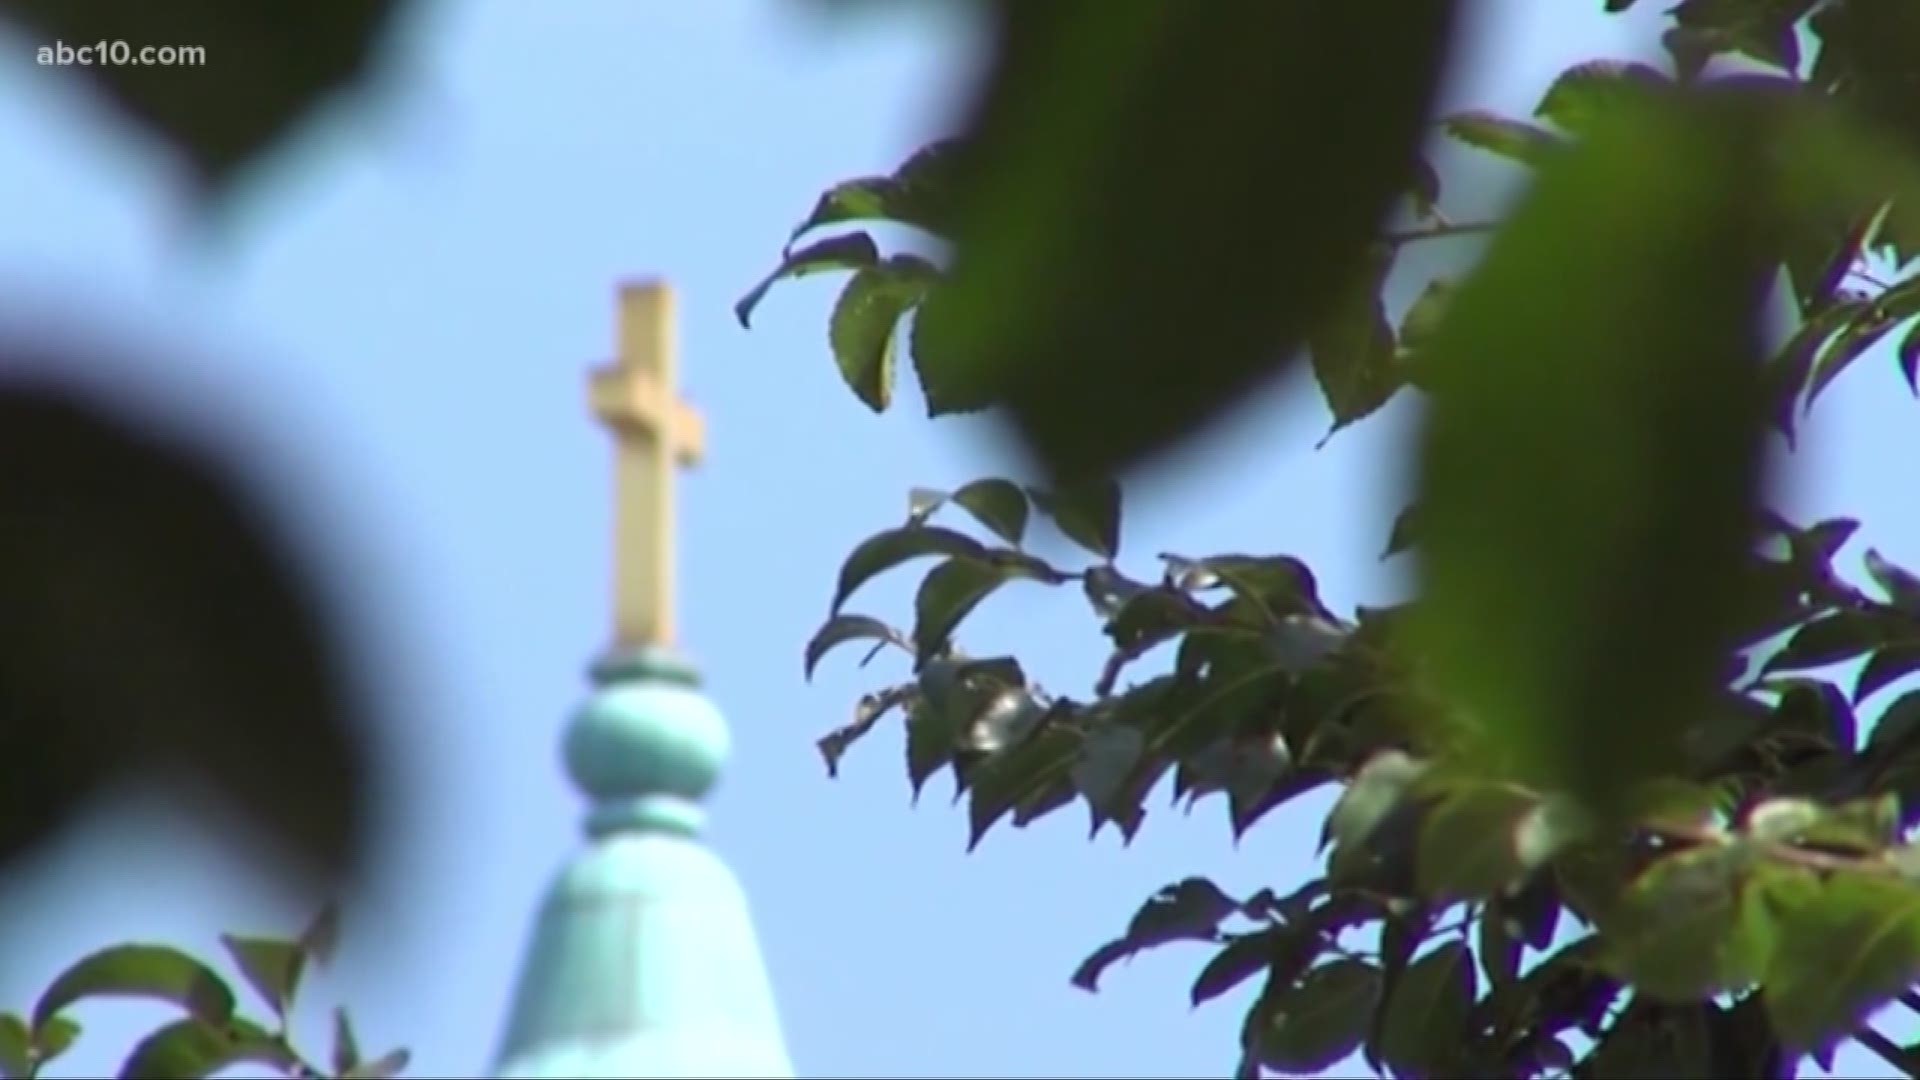 The Roman Catholic Jesuits released a list of more than 150 names of priests who have credible allegations of child sex abuse against them. And ABC10 has learned that 11 of them priests served in the Sacramento area over the past 50 years.